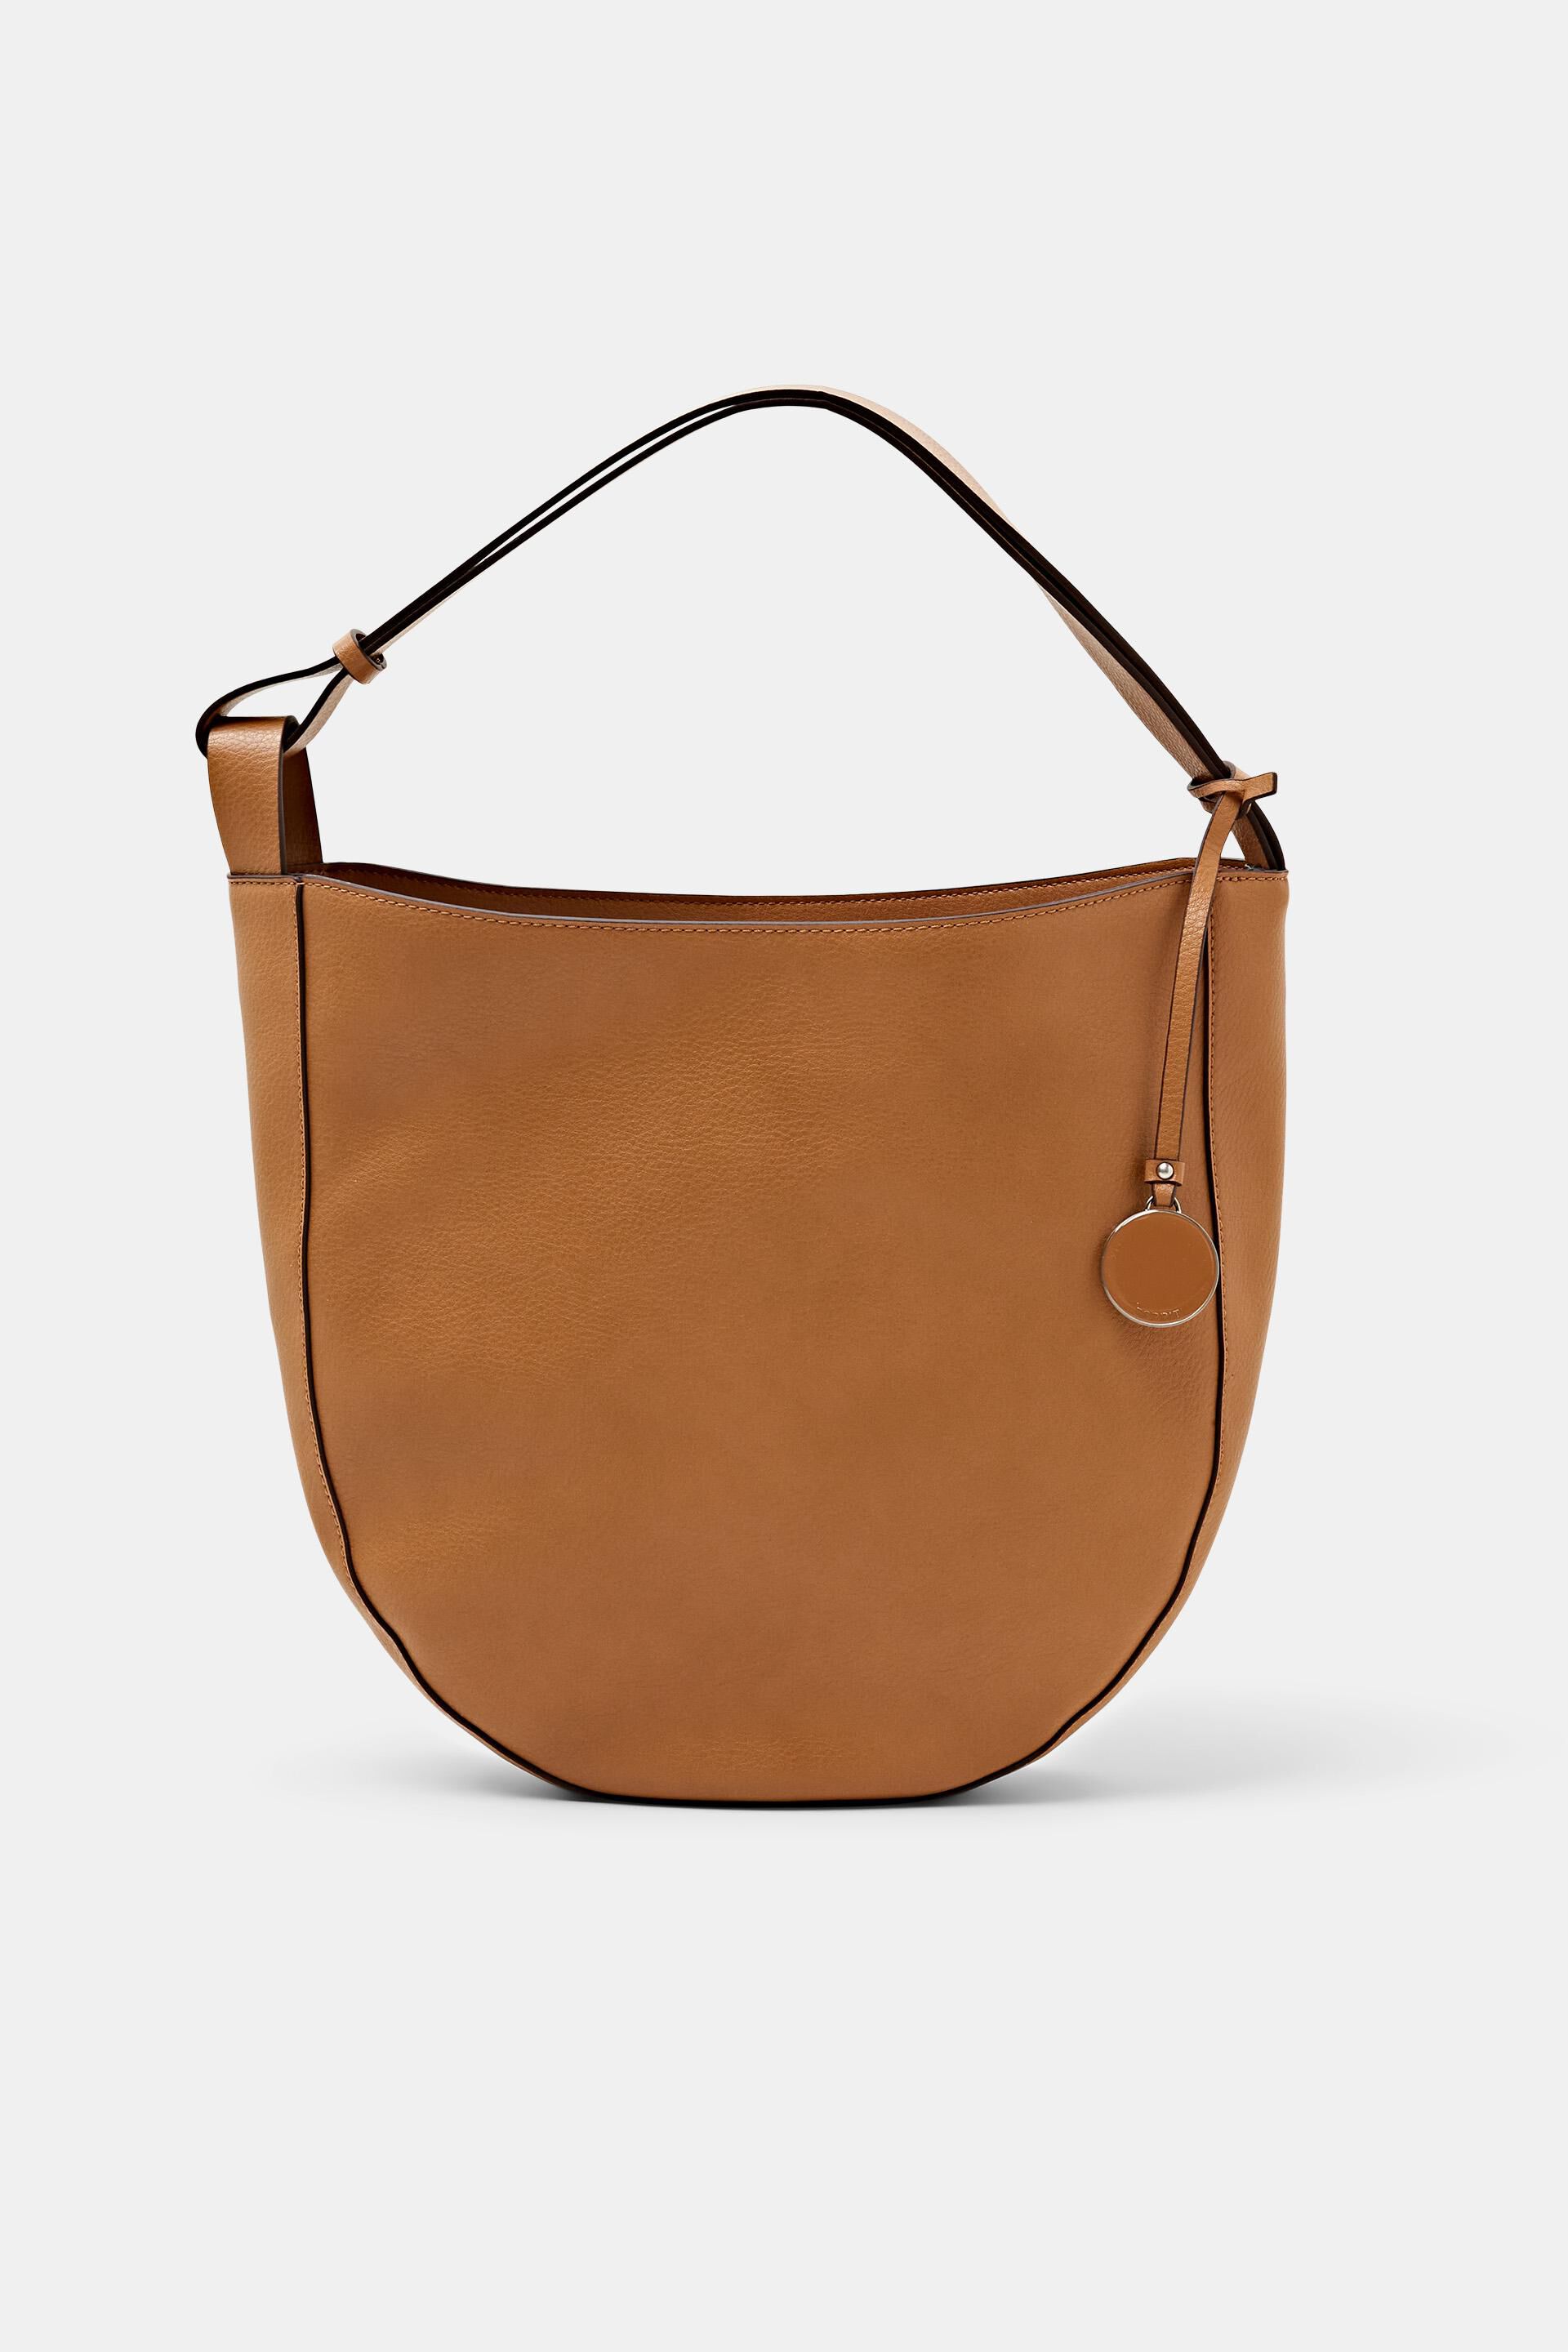 Esprit Online Store Recycled: faux bag leather hobo